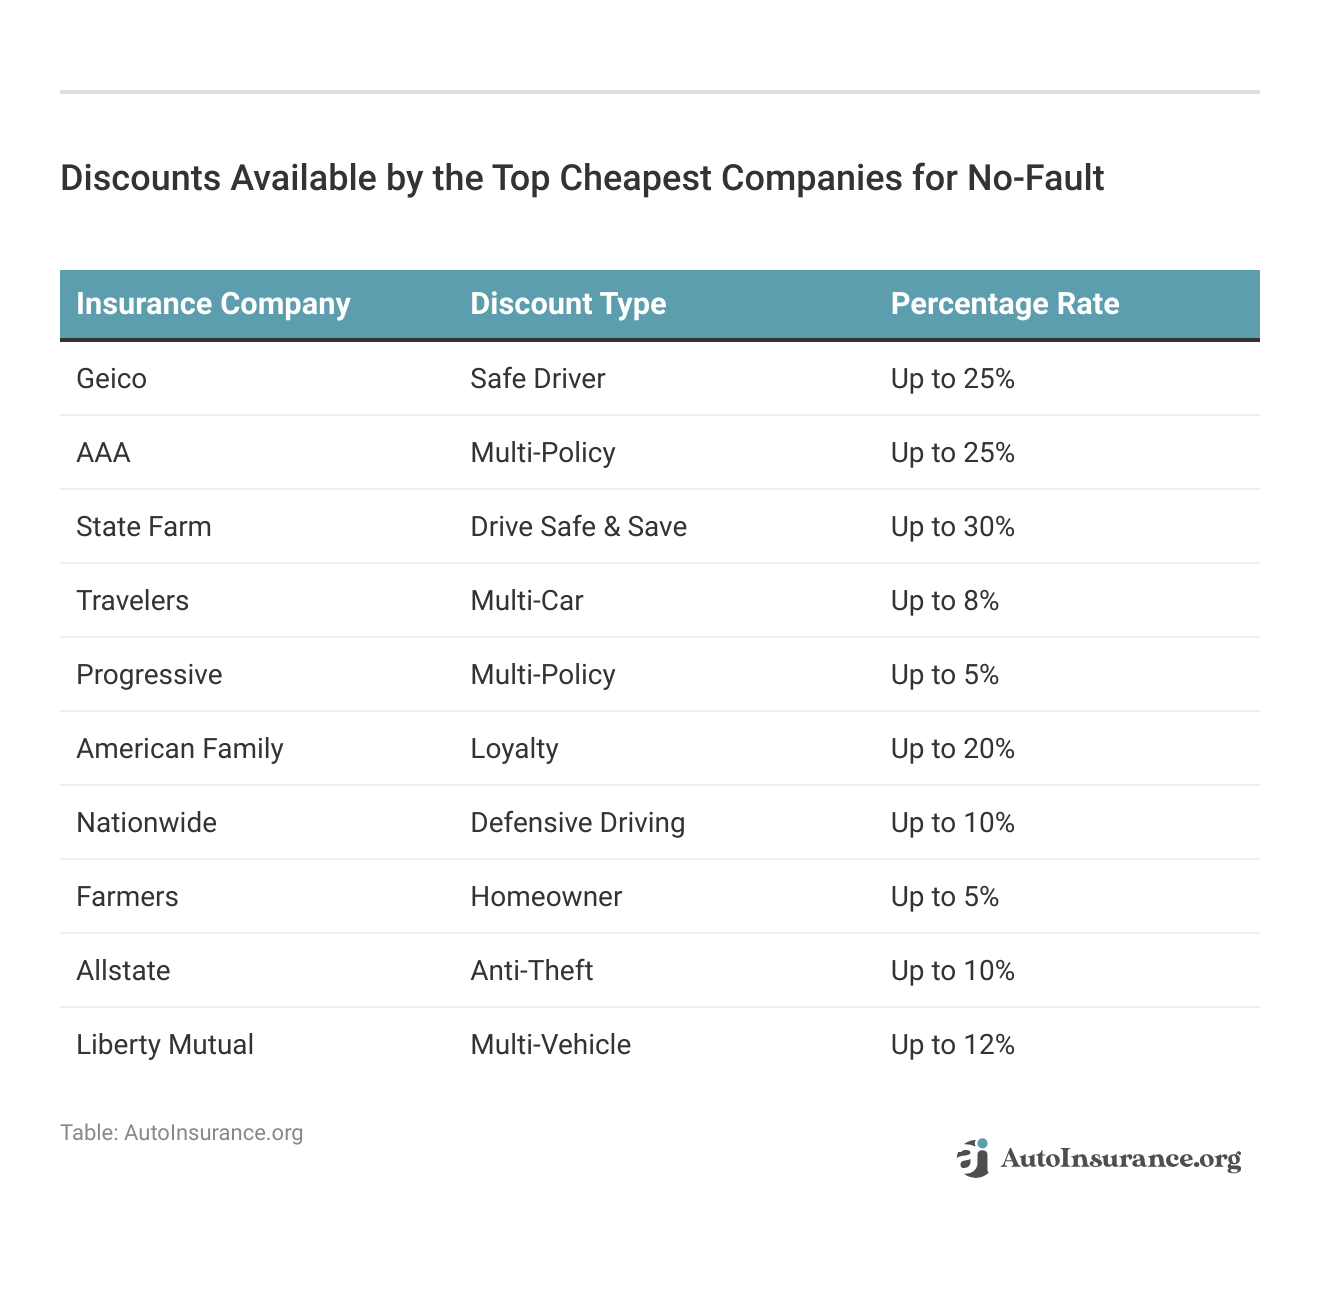 <h3>Discounts Available by the Top Cheapest Companies for No-Fault</h3>